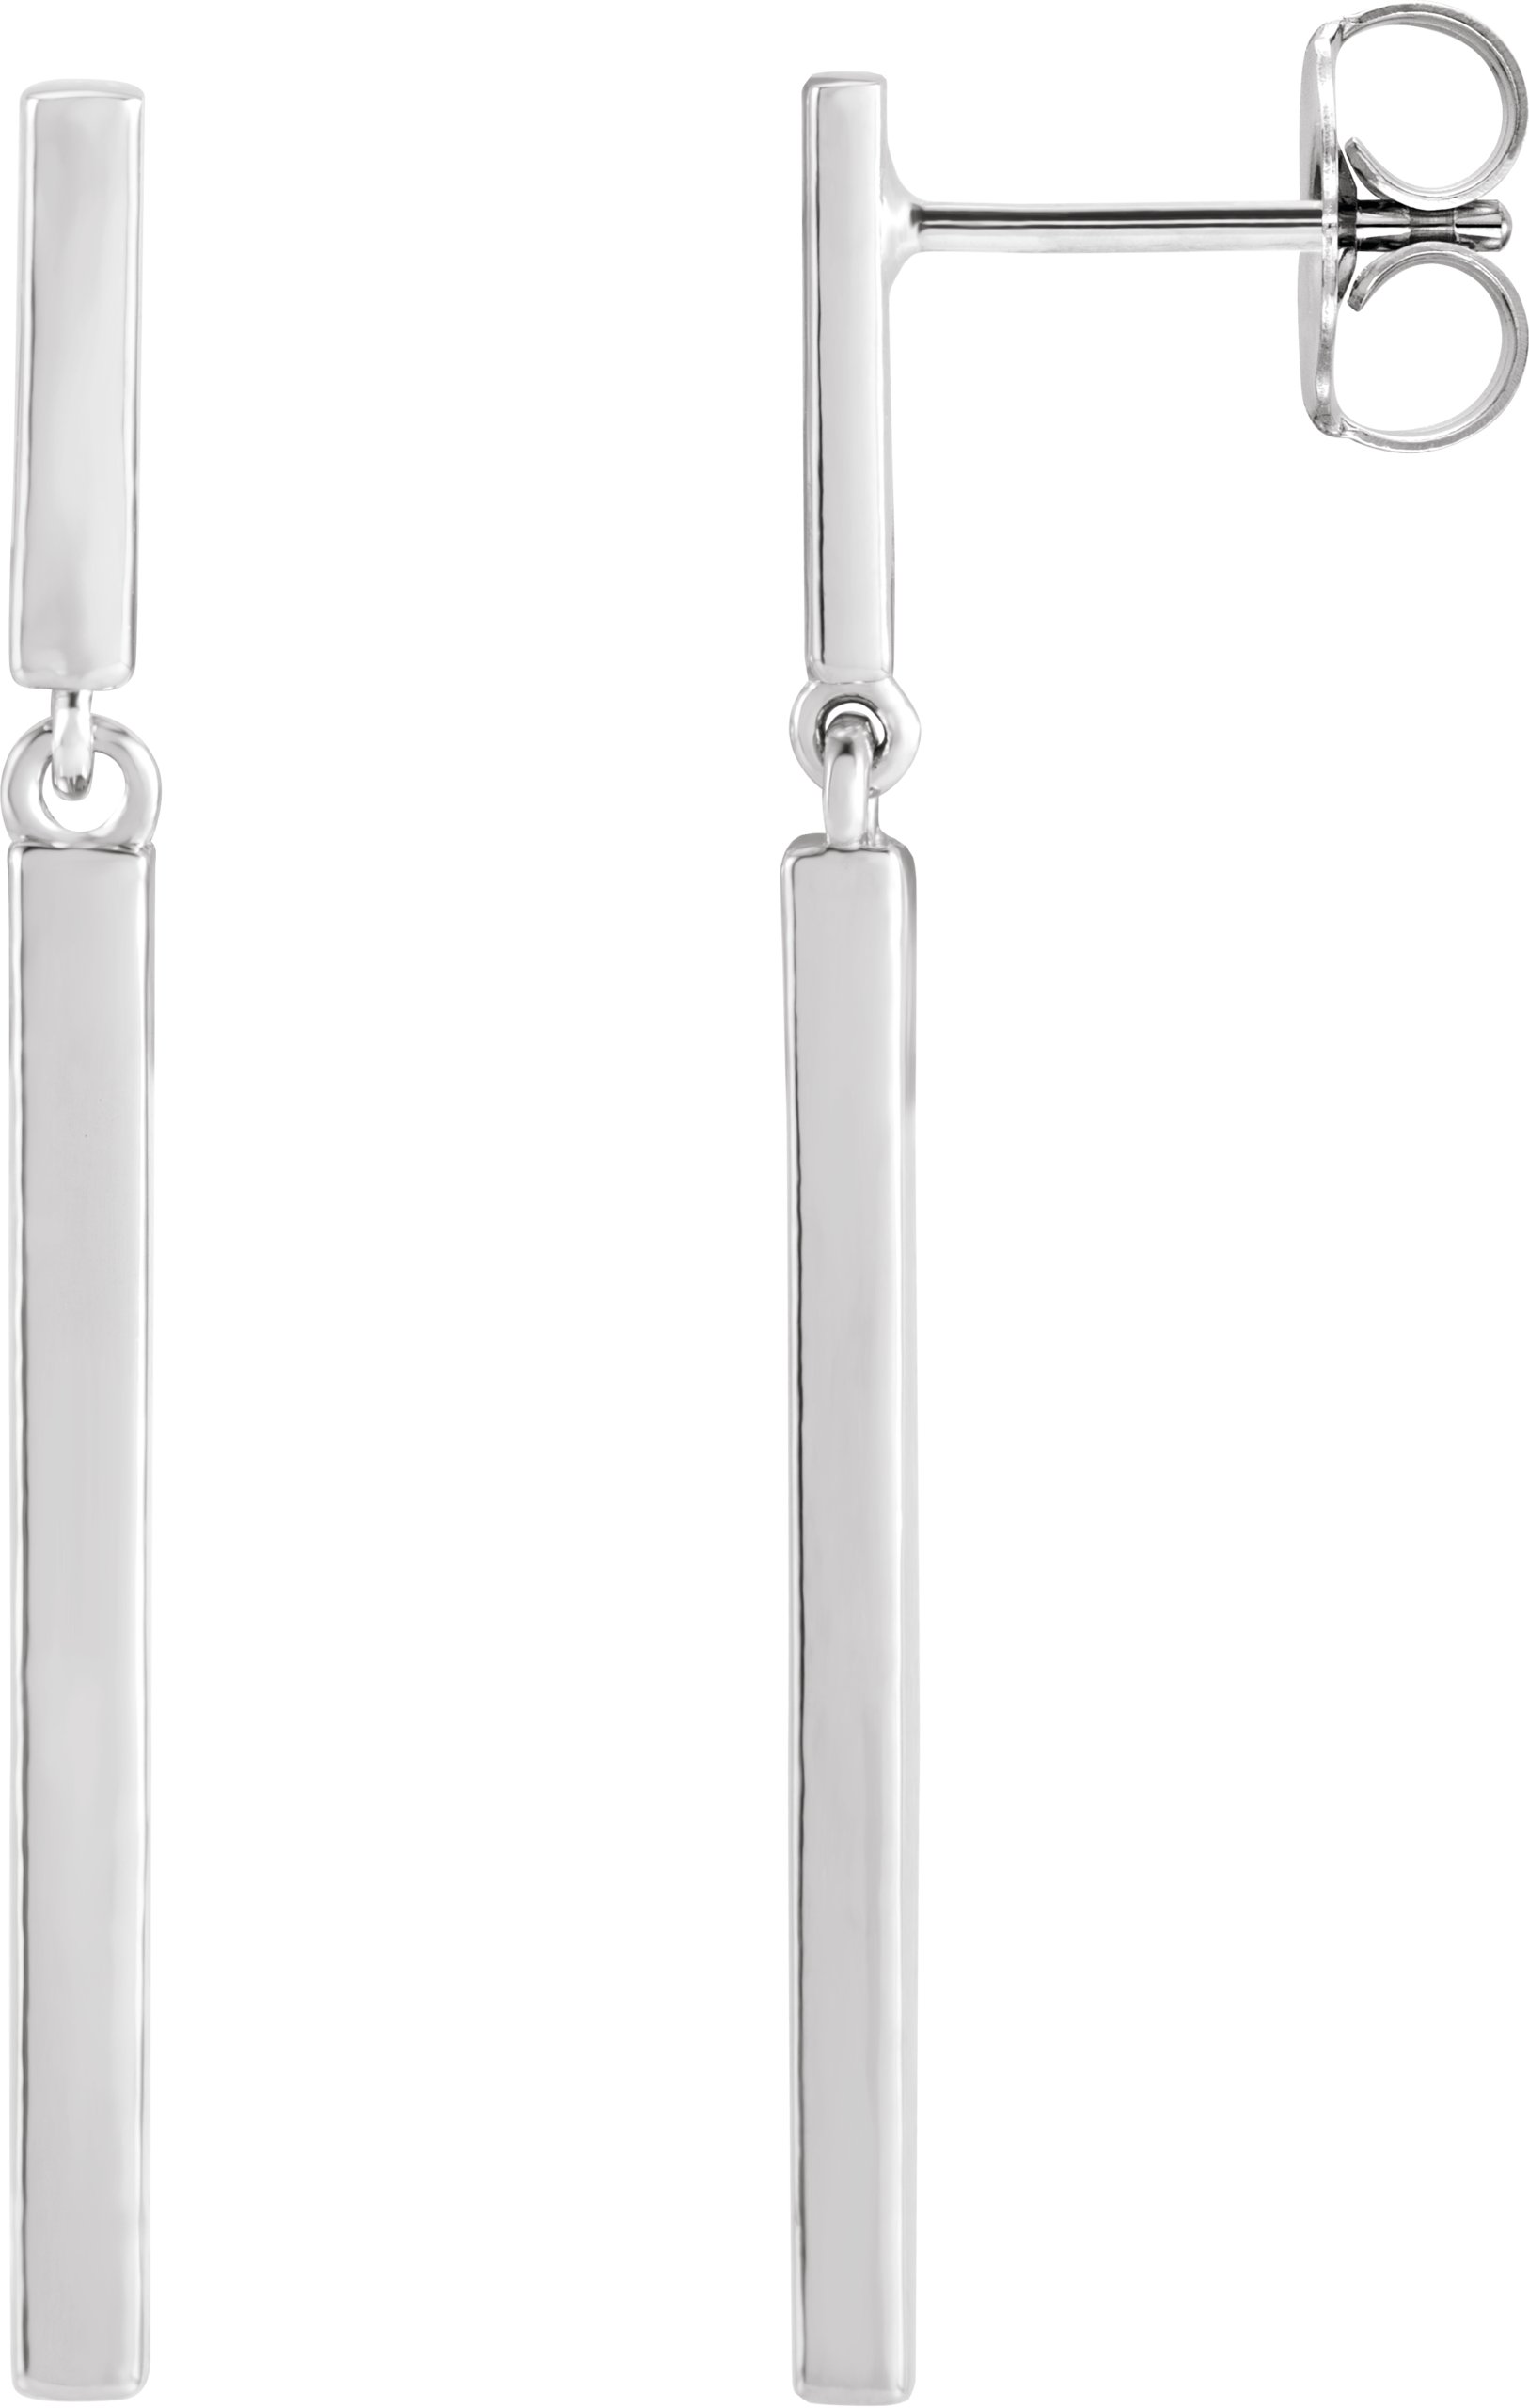 Sterling Silver 25.9x1.8 mm Articulated Bar Earrings